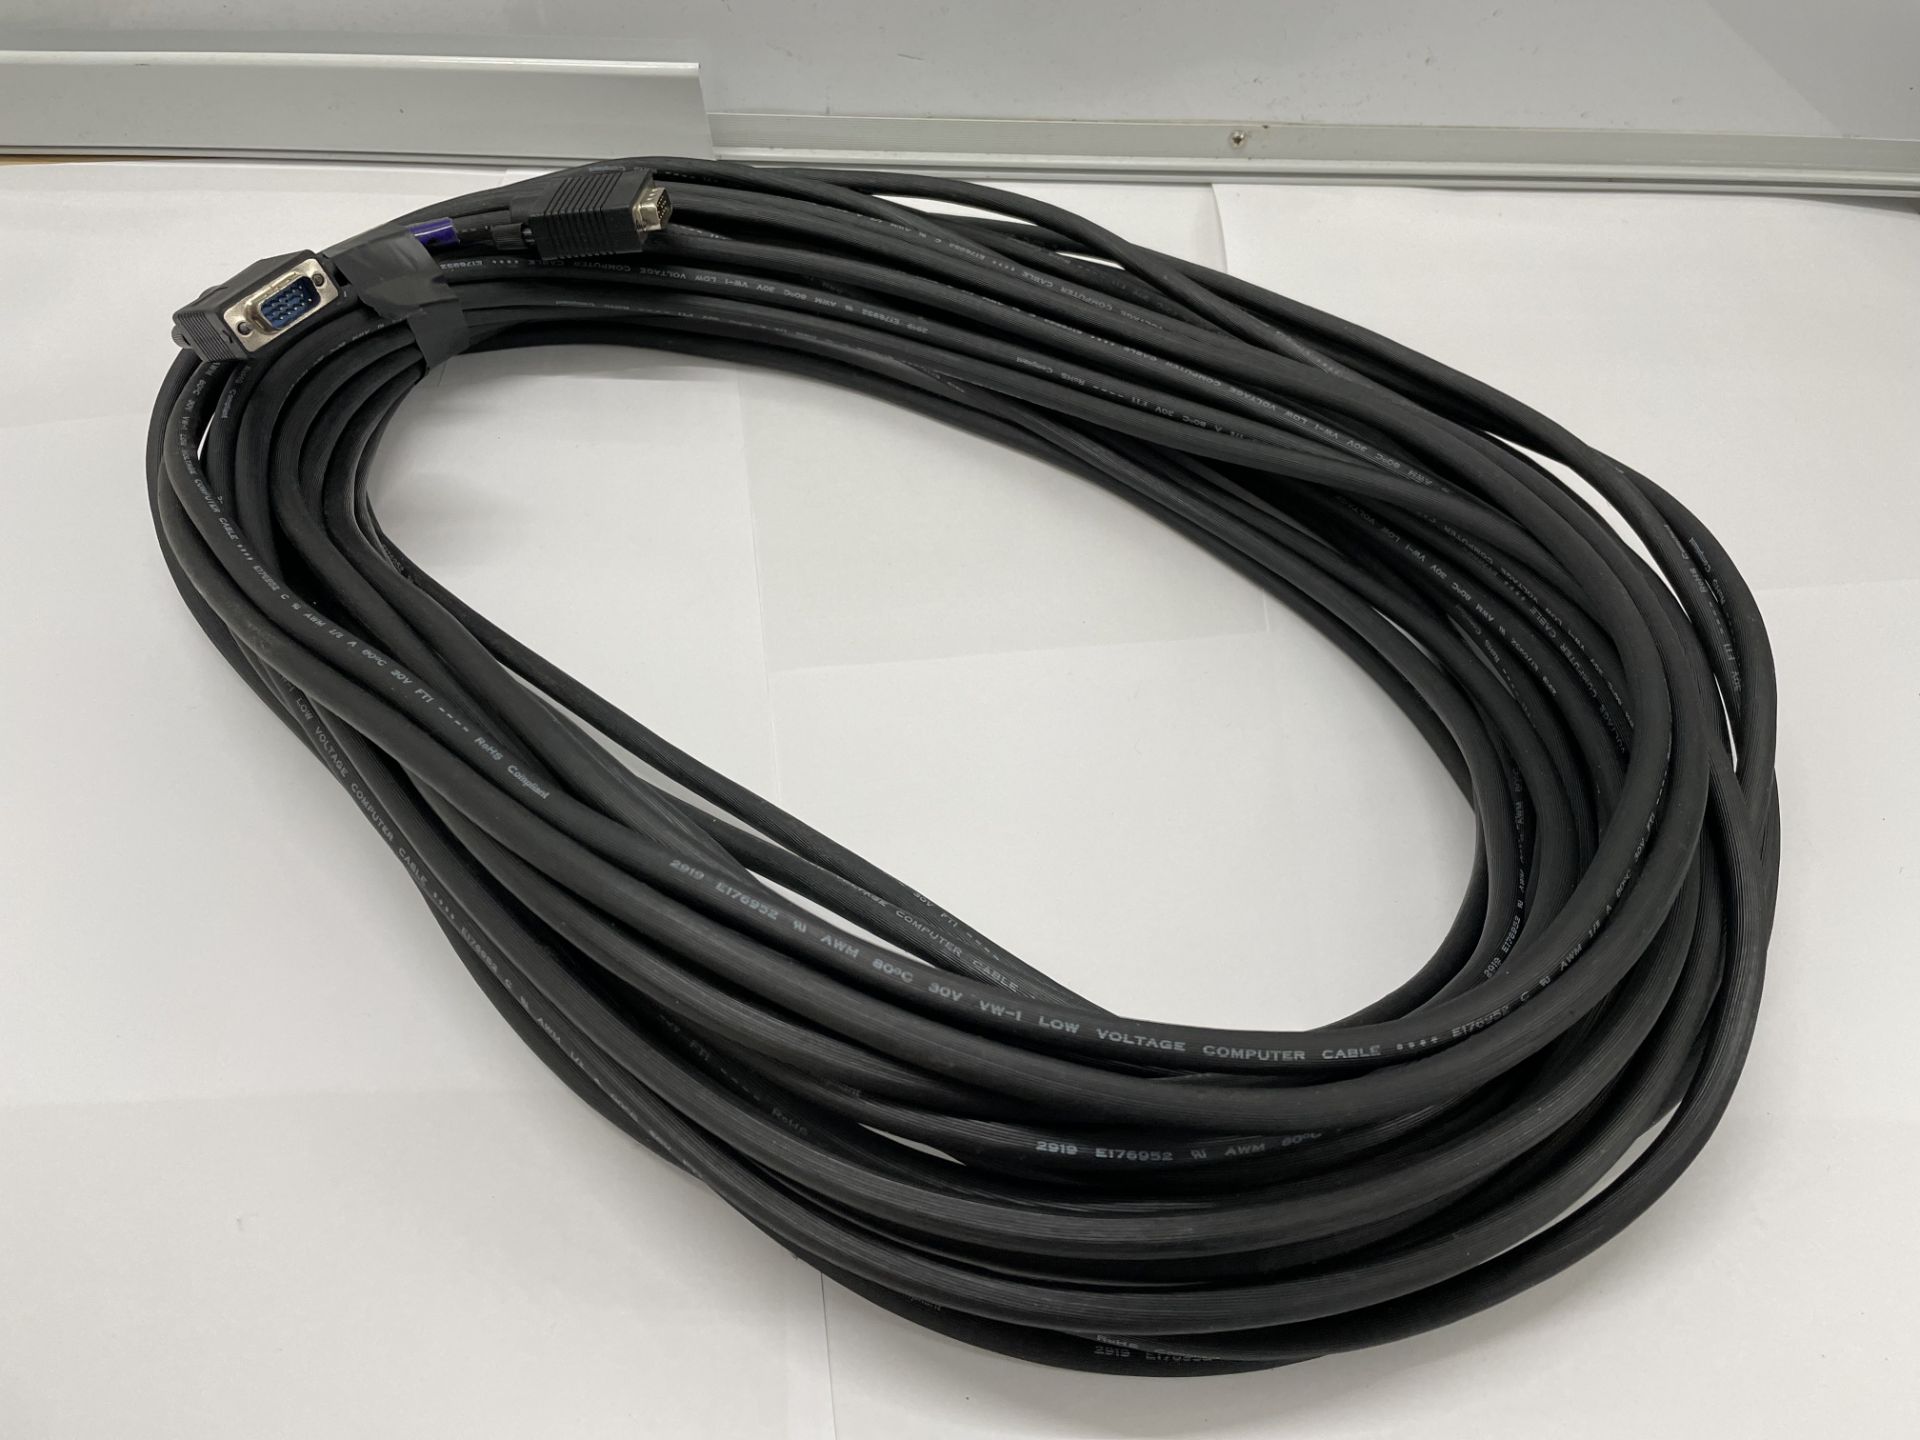 4 VGA Male to VGA Male Video Leads, 20m (ex hire, used condition)-located at Pro Event Solutions, - Image 2 of 3